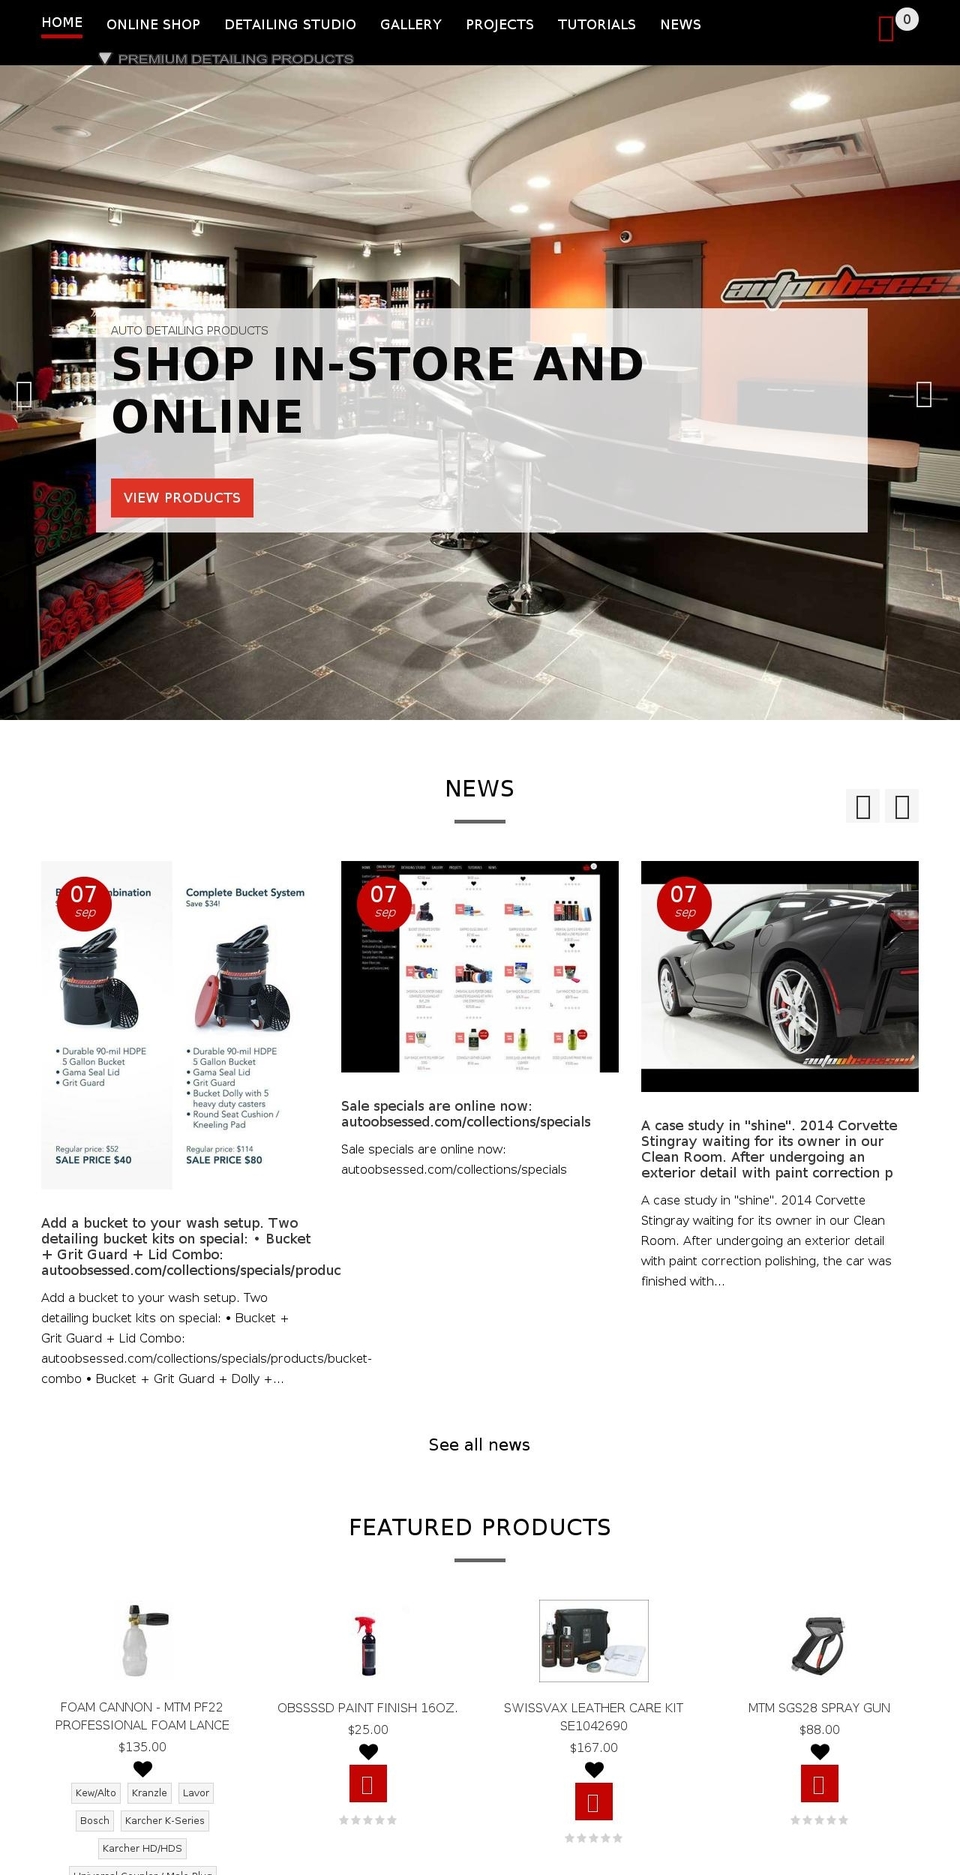 Copy of theme-export-createsimple-inc-myshopify... Shopify theme site example obsessedshowroom.org